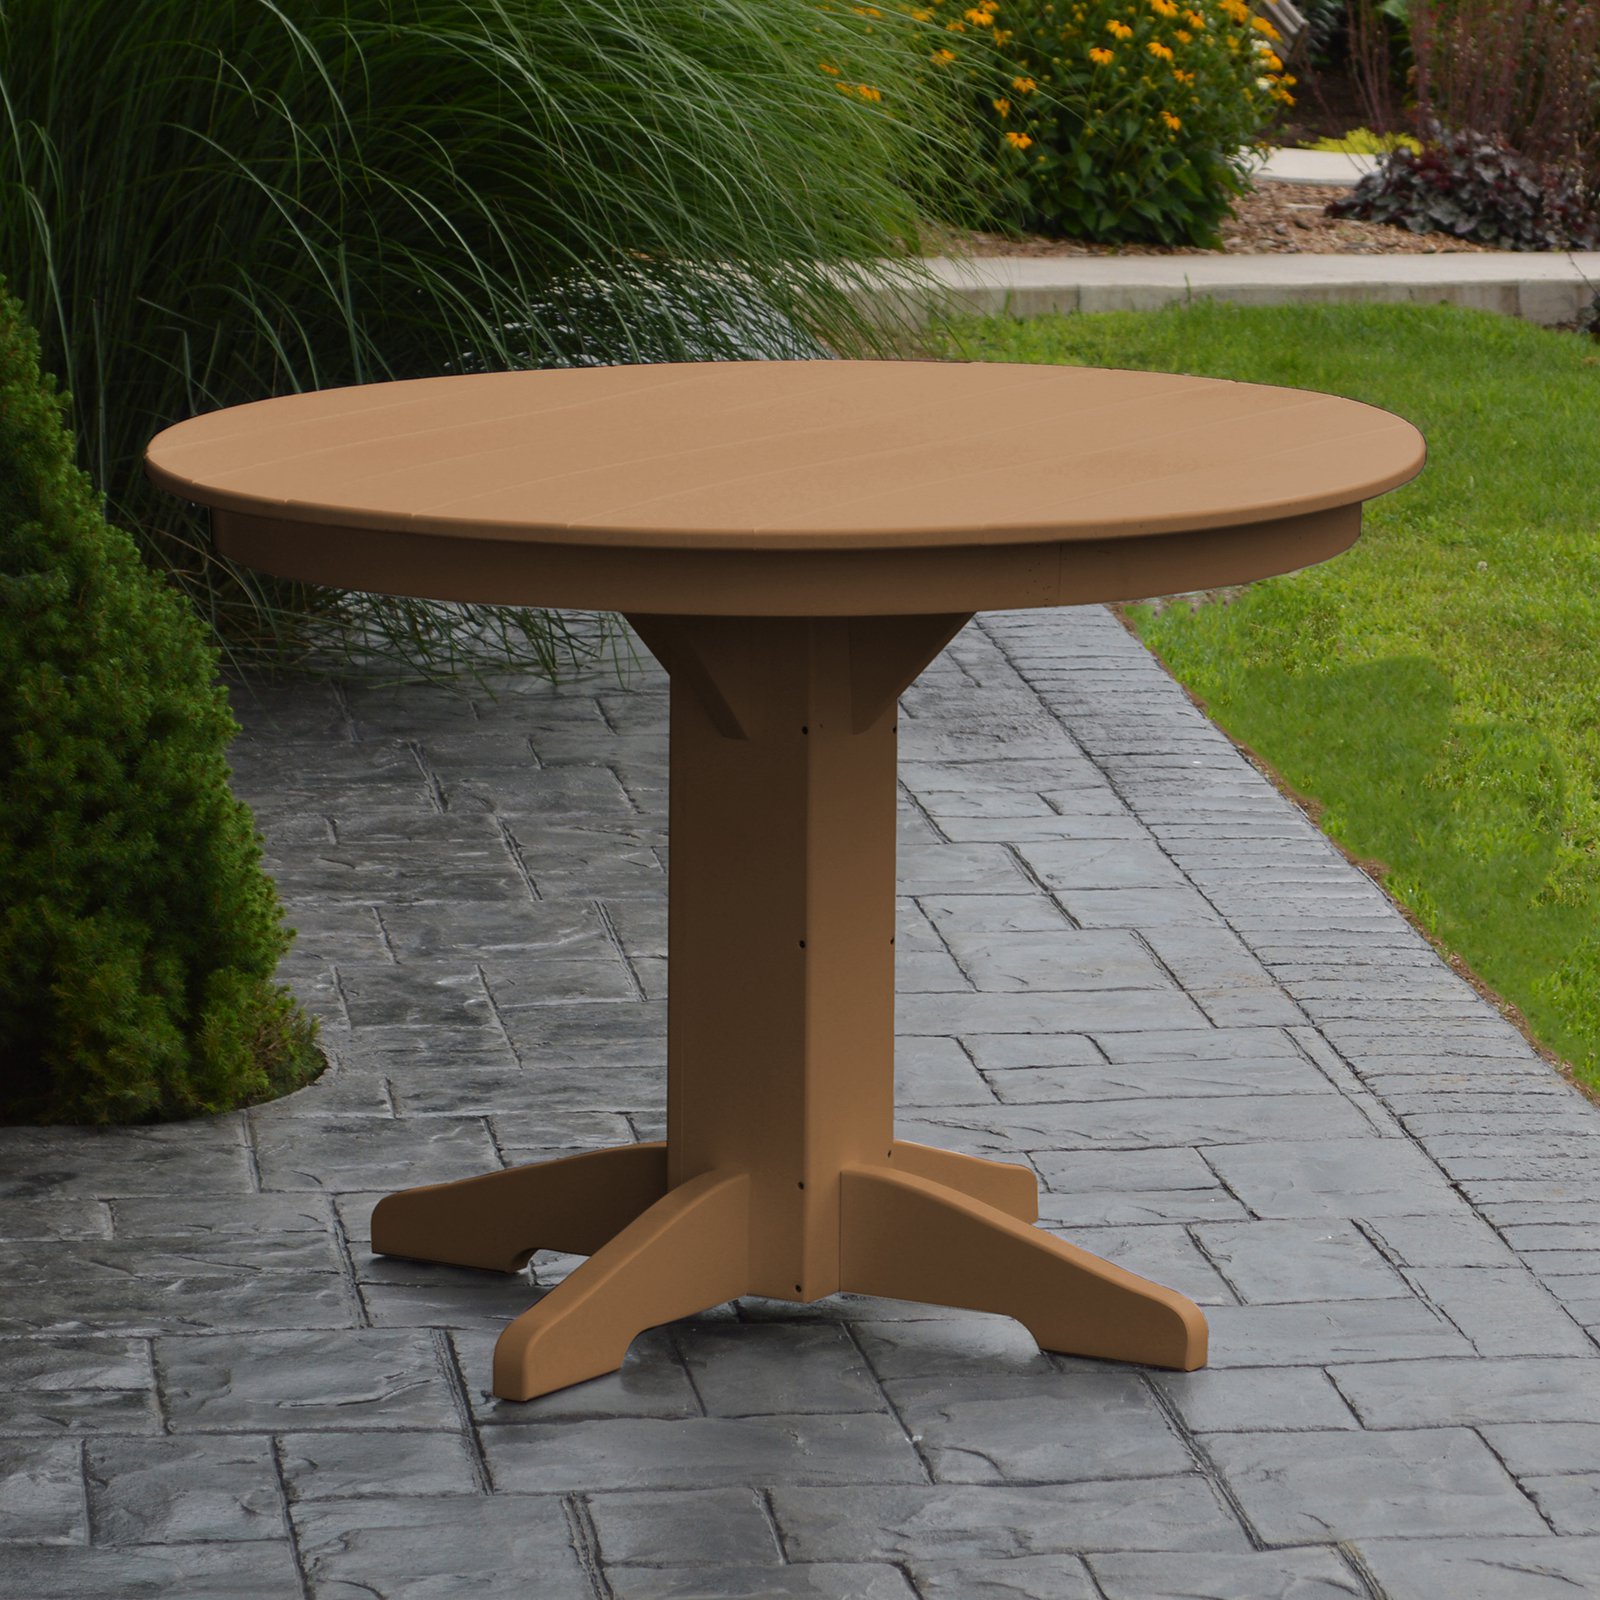 A &amp; L Furniture Poly 44 in. Round Outdoor Dining Table - image 2 of 2